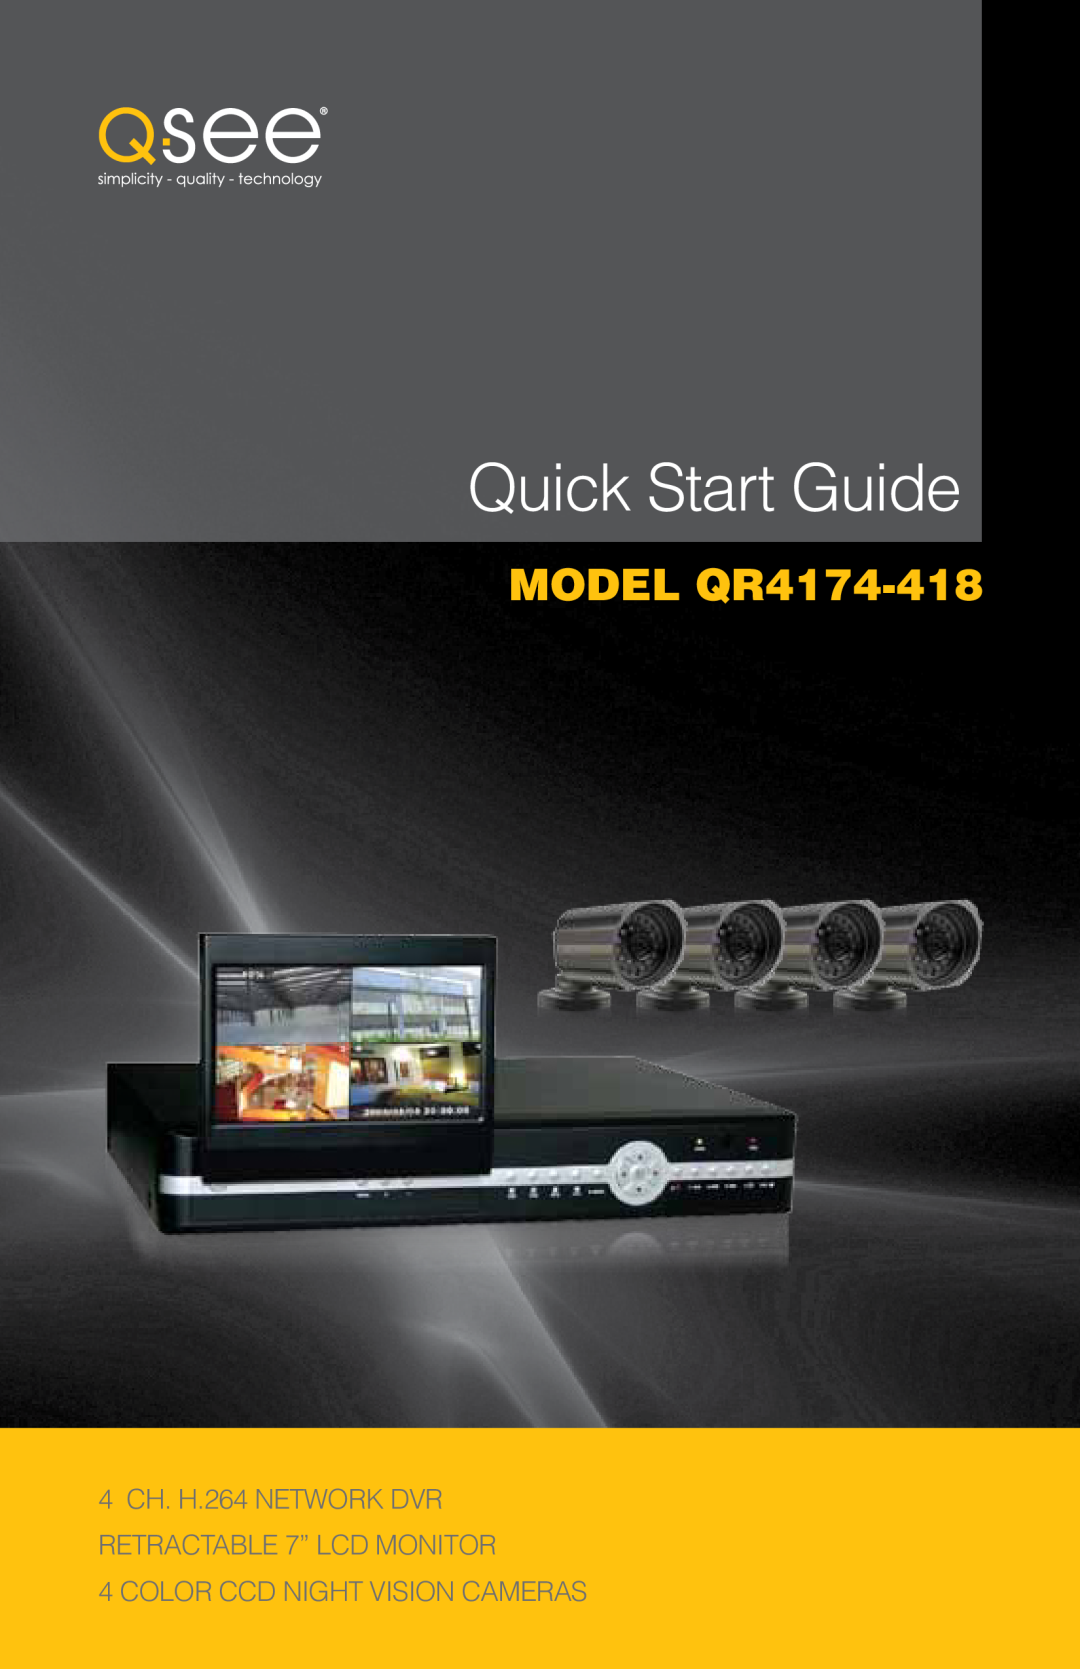 Q-See quick start Quick Start Guide, model QR4174-418, 4 CH. H.264 NETWORK DVR RETRACTABLE 7” LCD MONITOR 